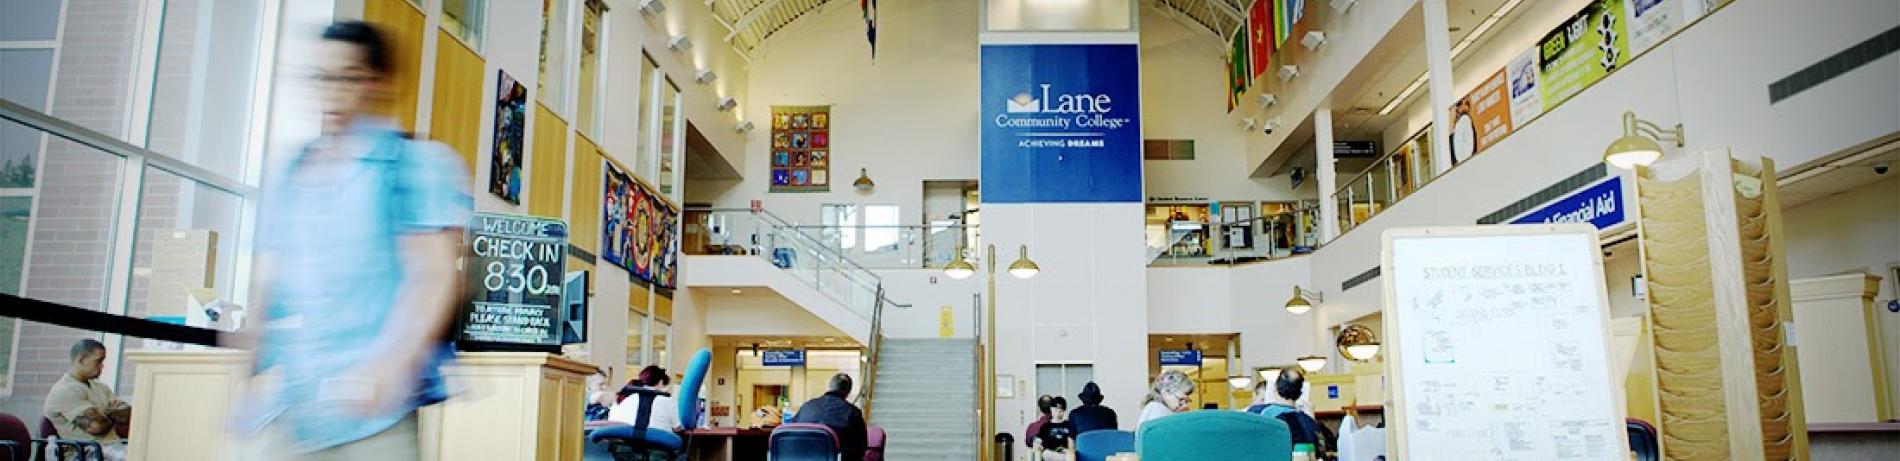 Building one at lane community college